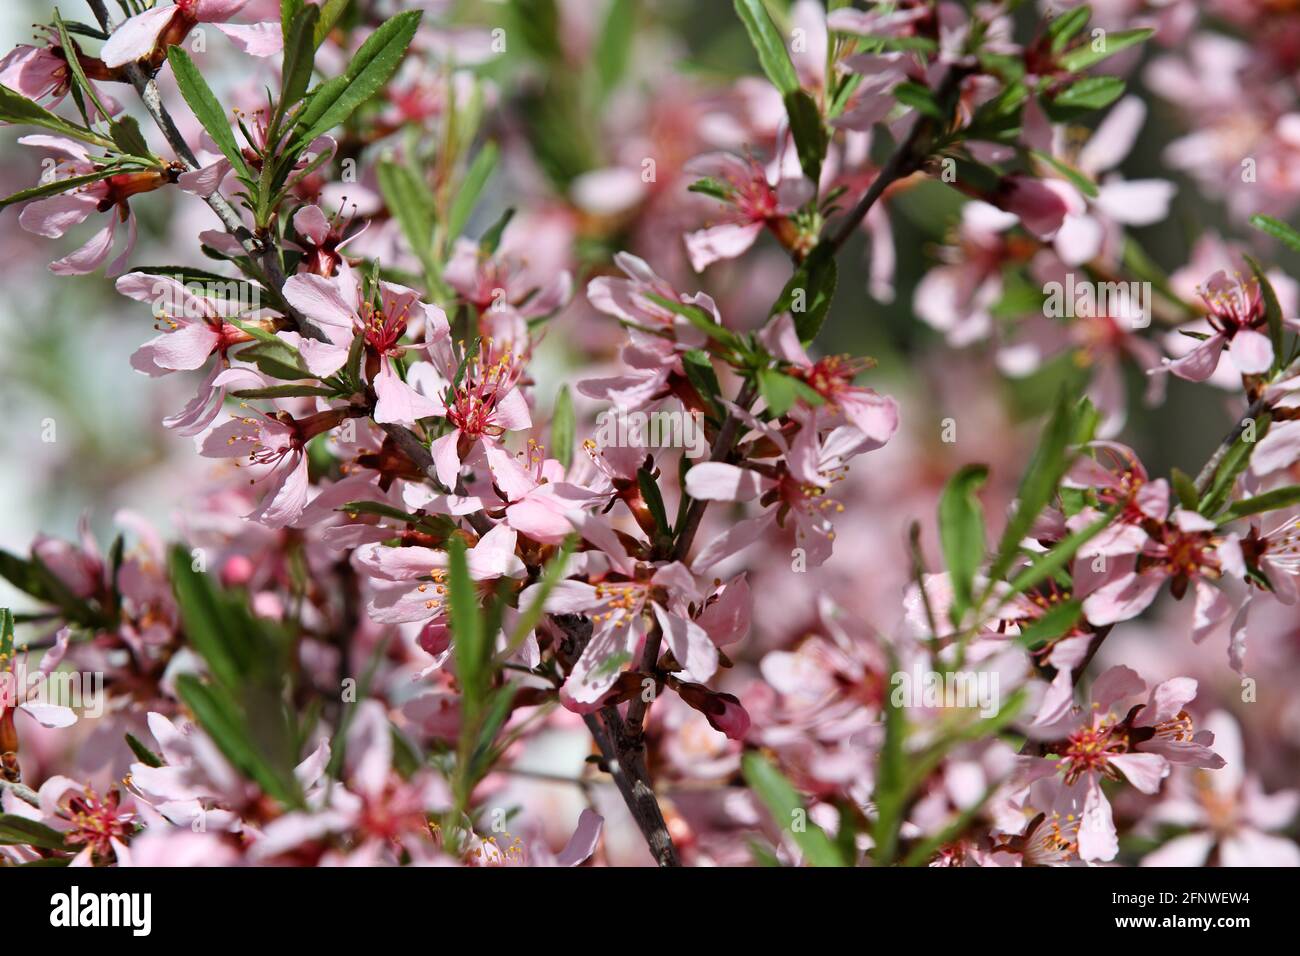 Dwarf almond blooming in garden with beautiful pink flowers Stock Photo